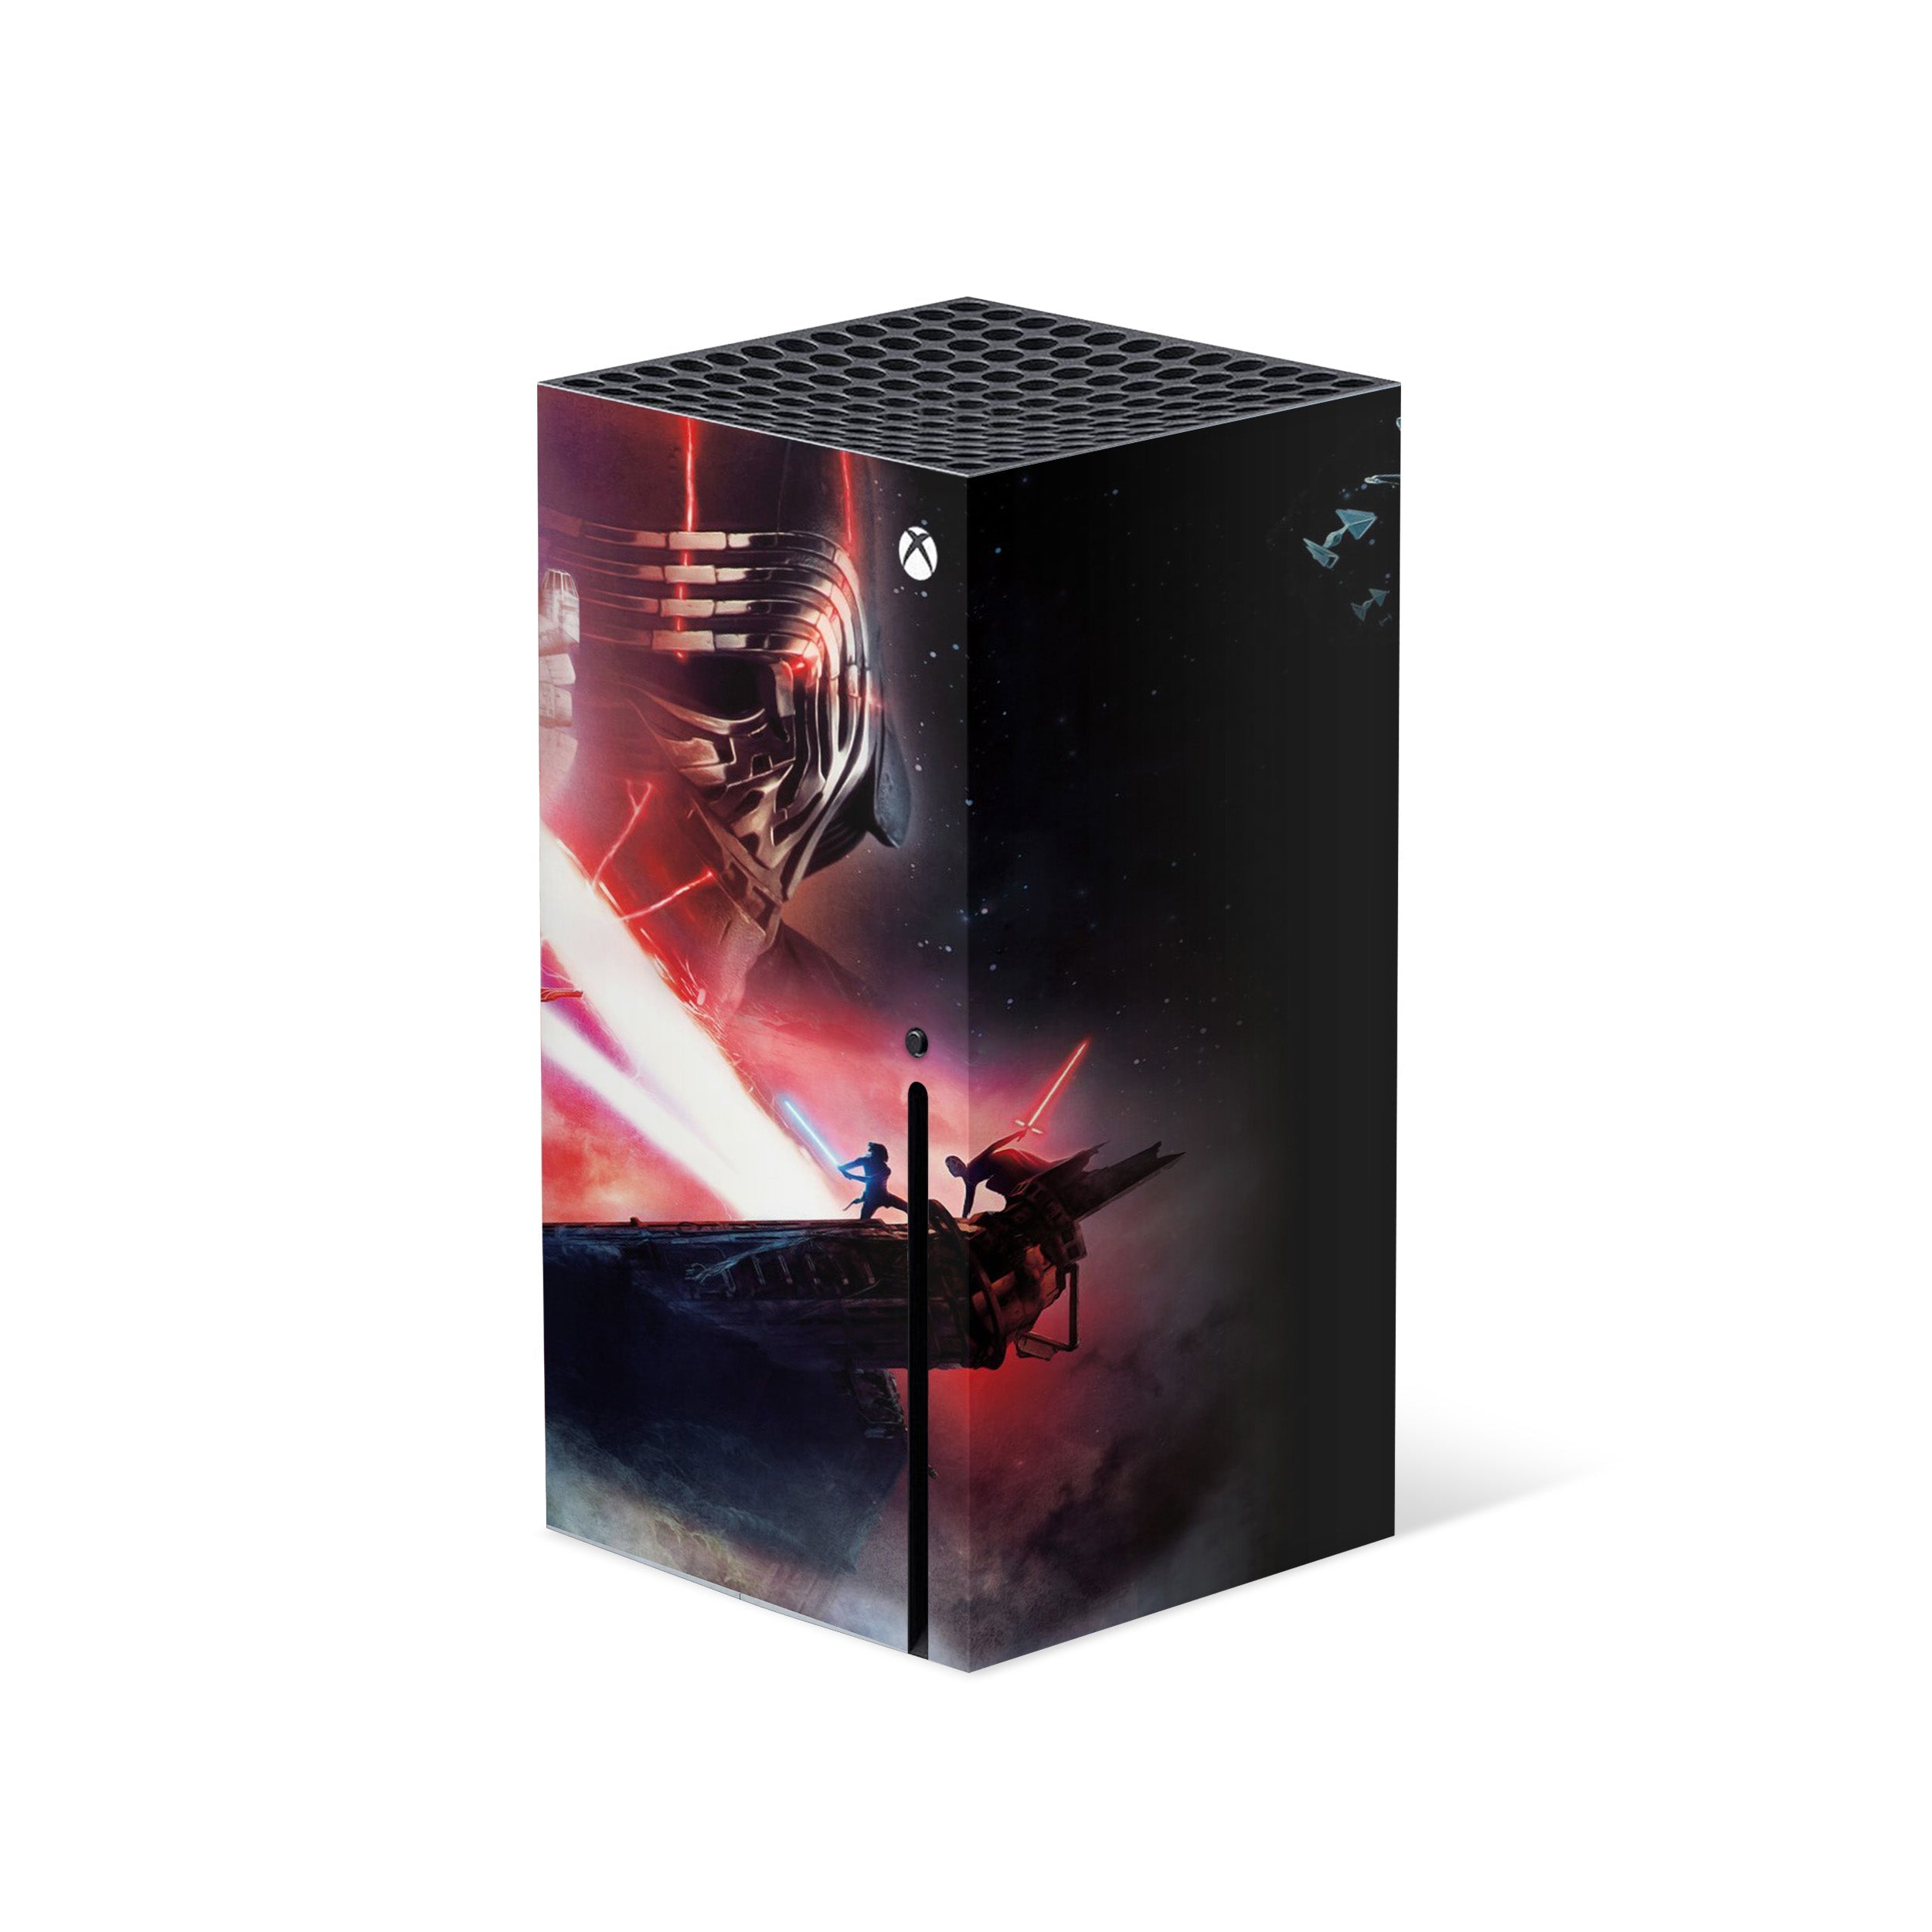 A video game skin featuring a Star Wars design for the Xbox Series X.